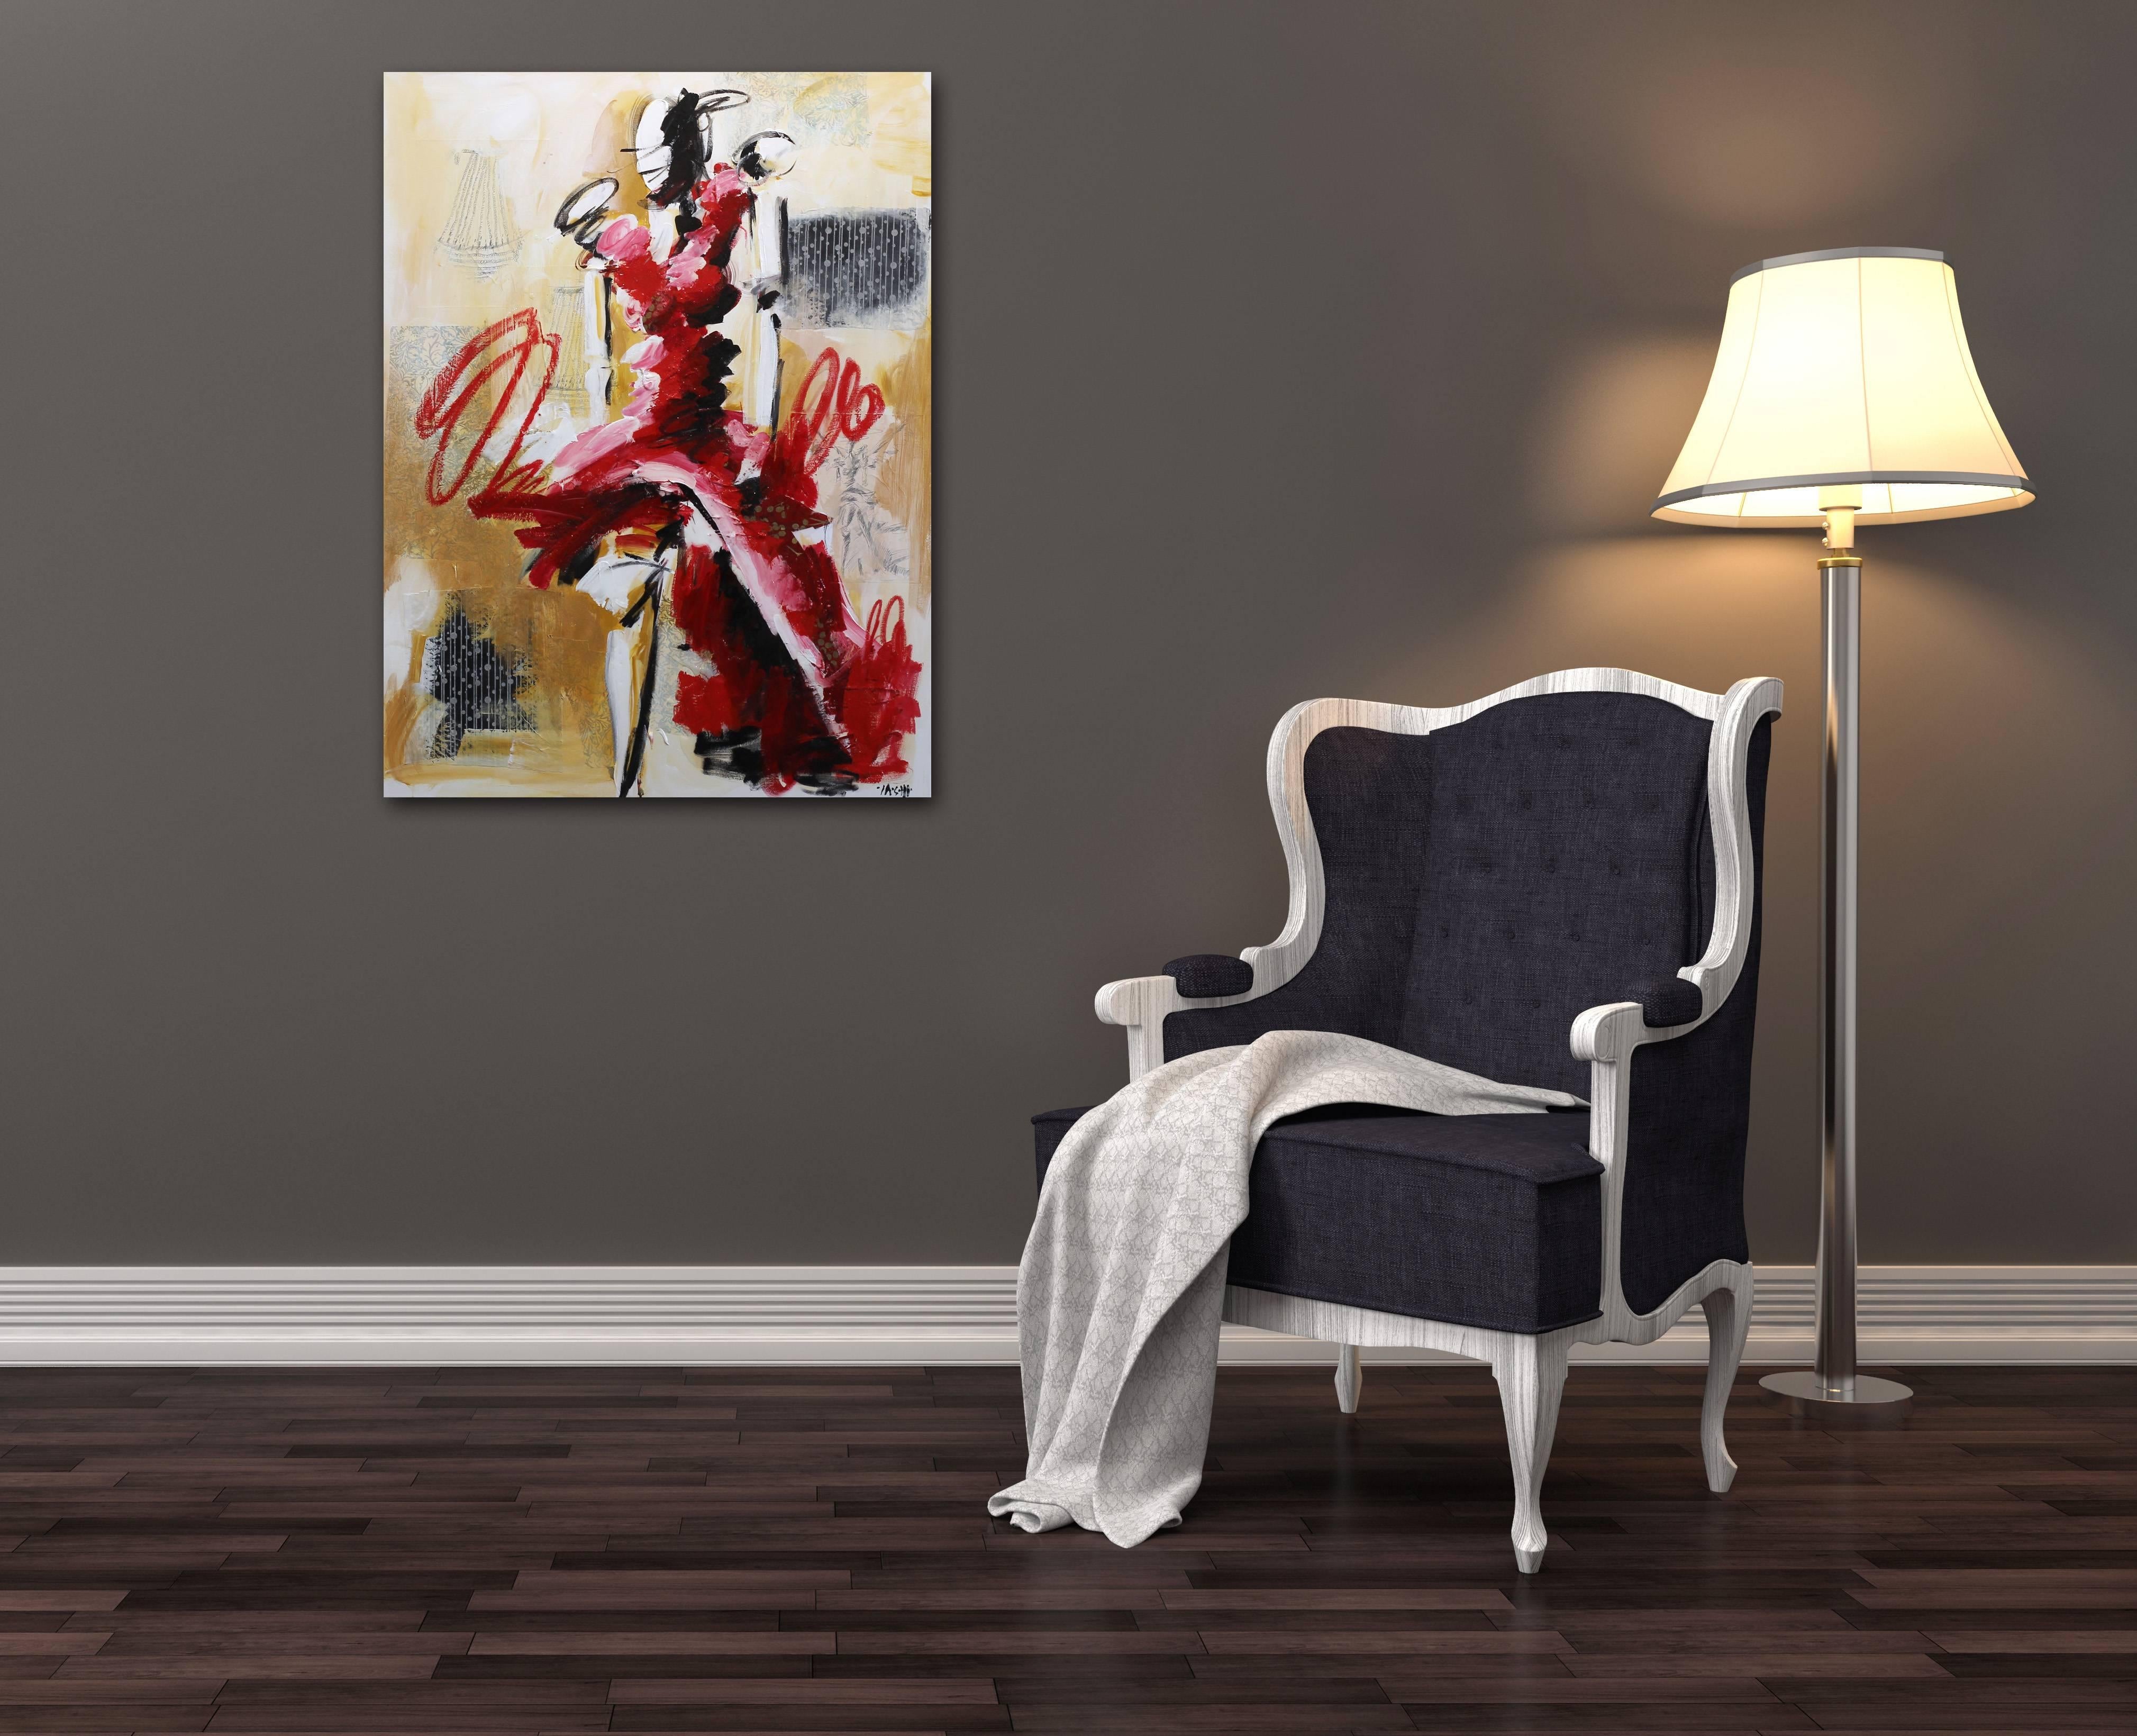 Lady in Red - Contemporary Mixed Media Art by Ash Almonte